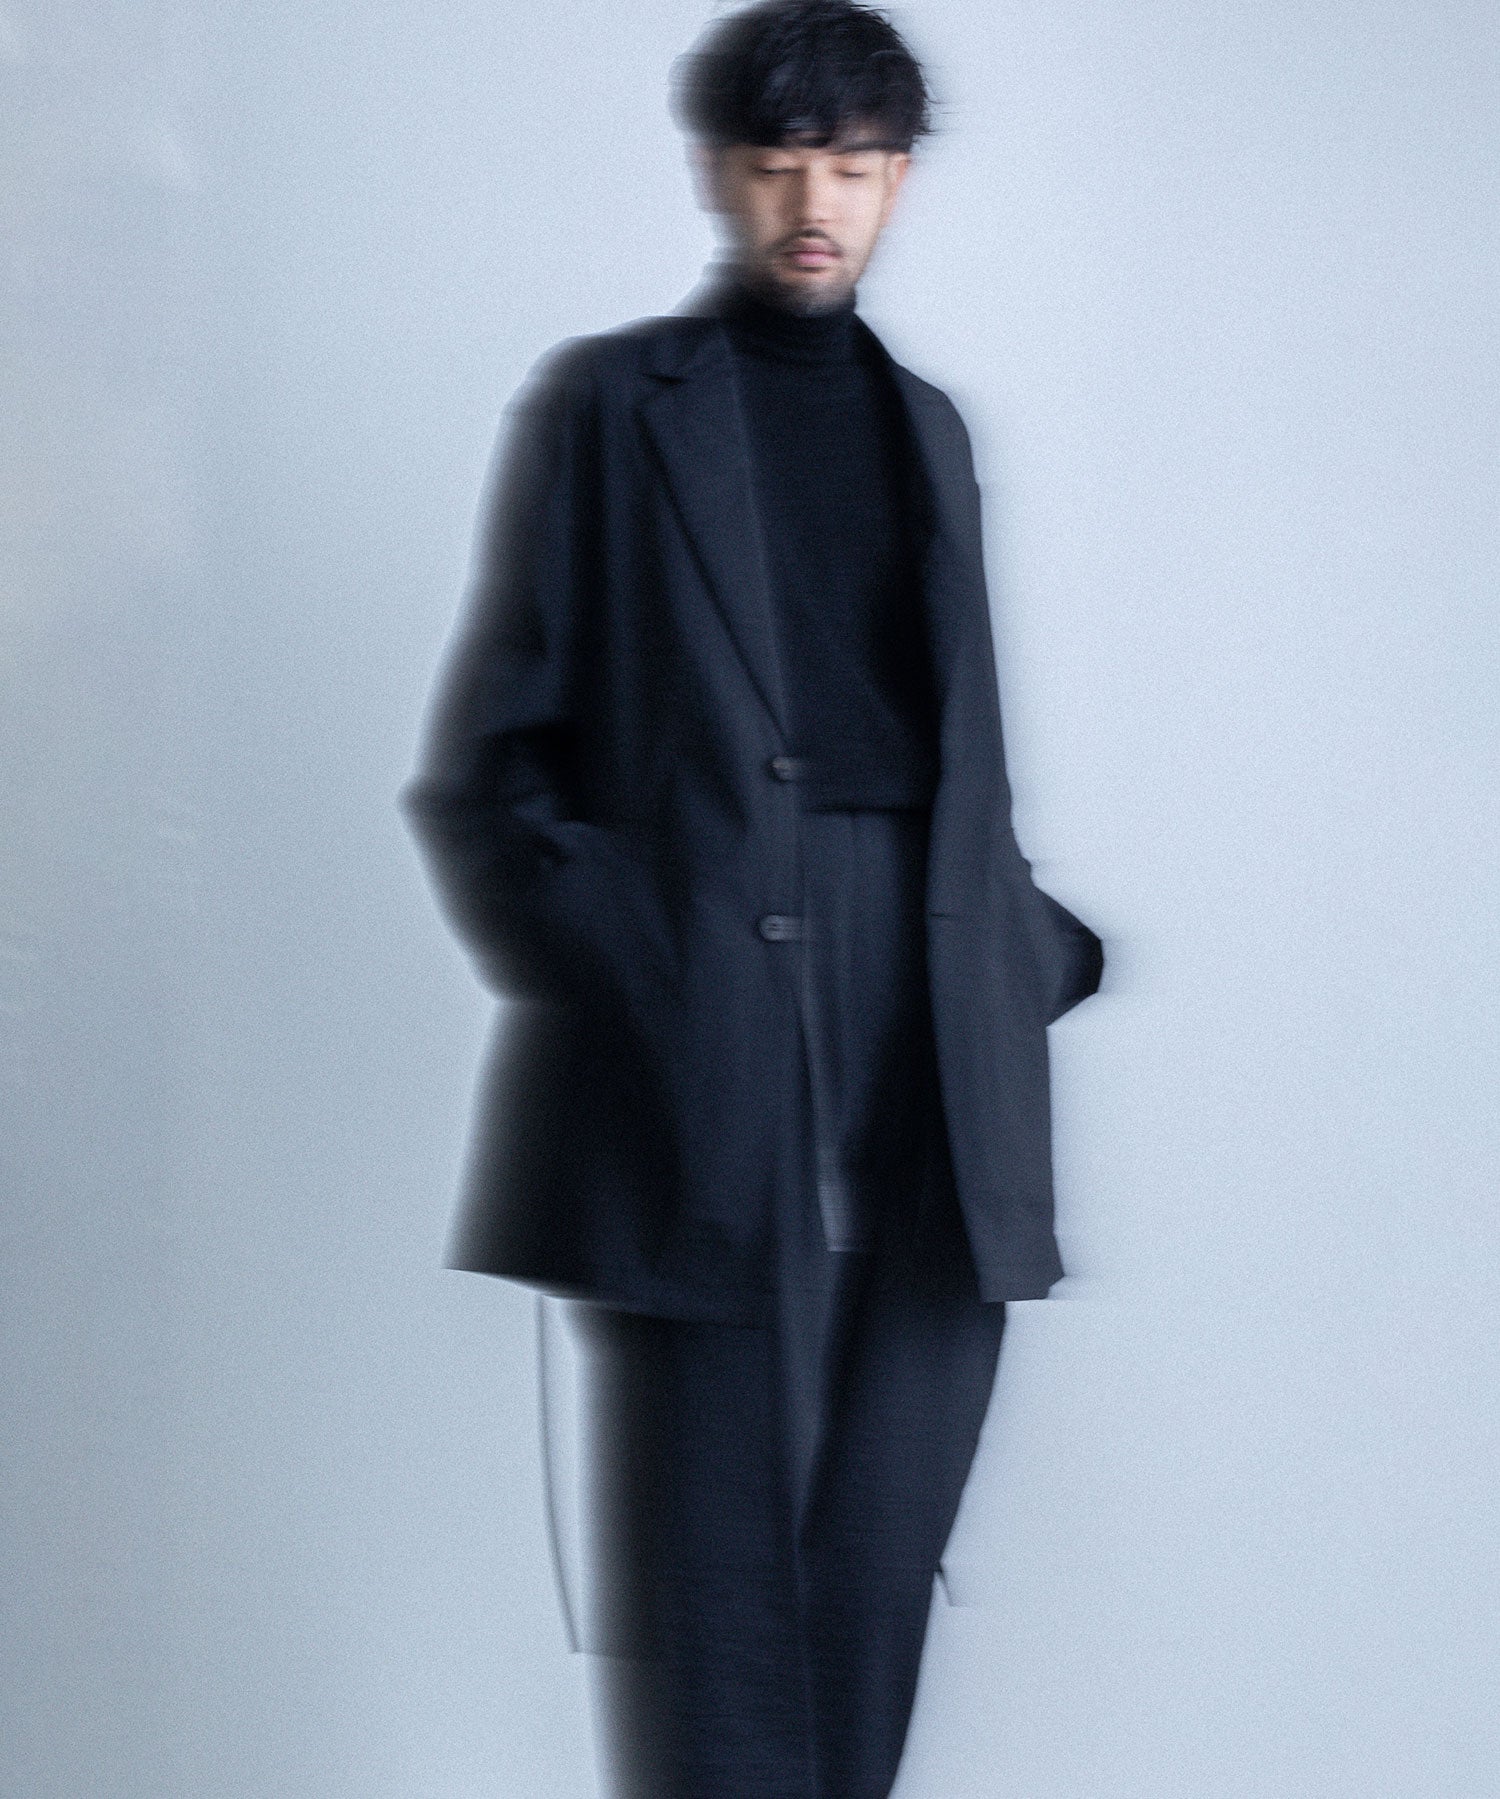 stein(シュタイン)の23SSコレクションのOVERSIZED NEW STRUCTURE TAILORED JACKETのBLACK